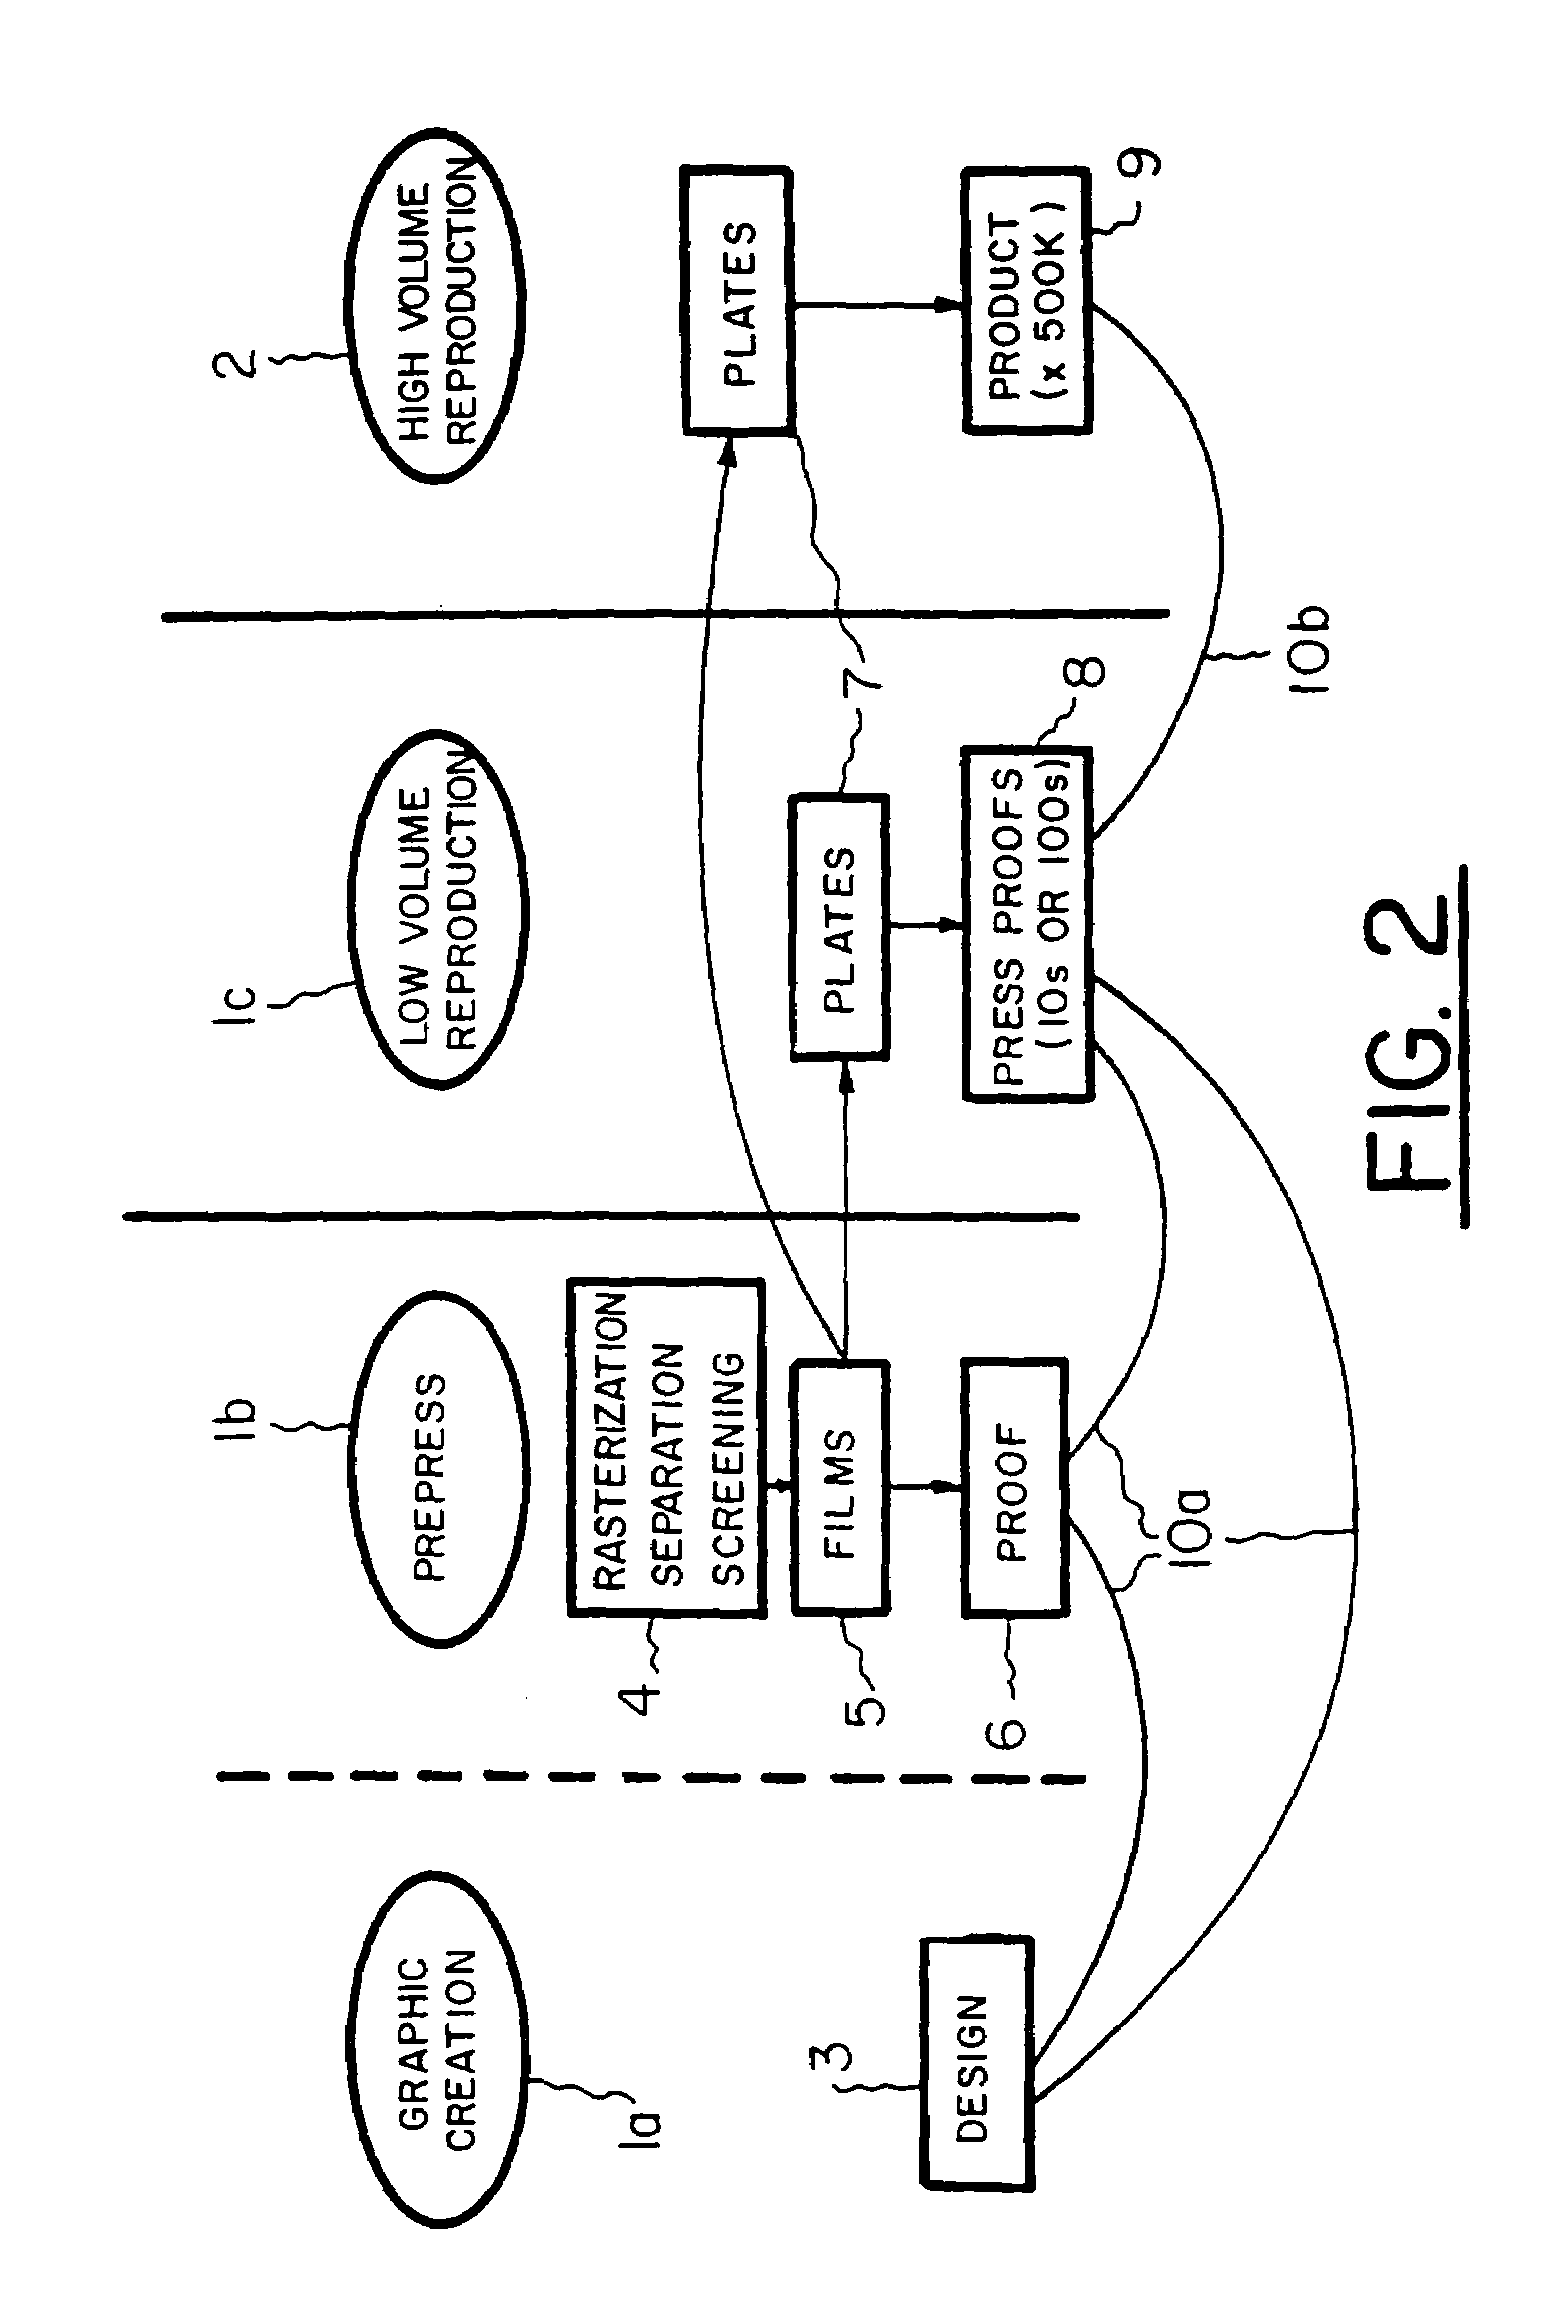 System for distributing and controlling color reproduction at multiple sites